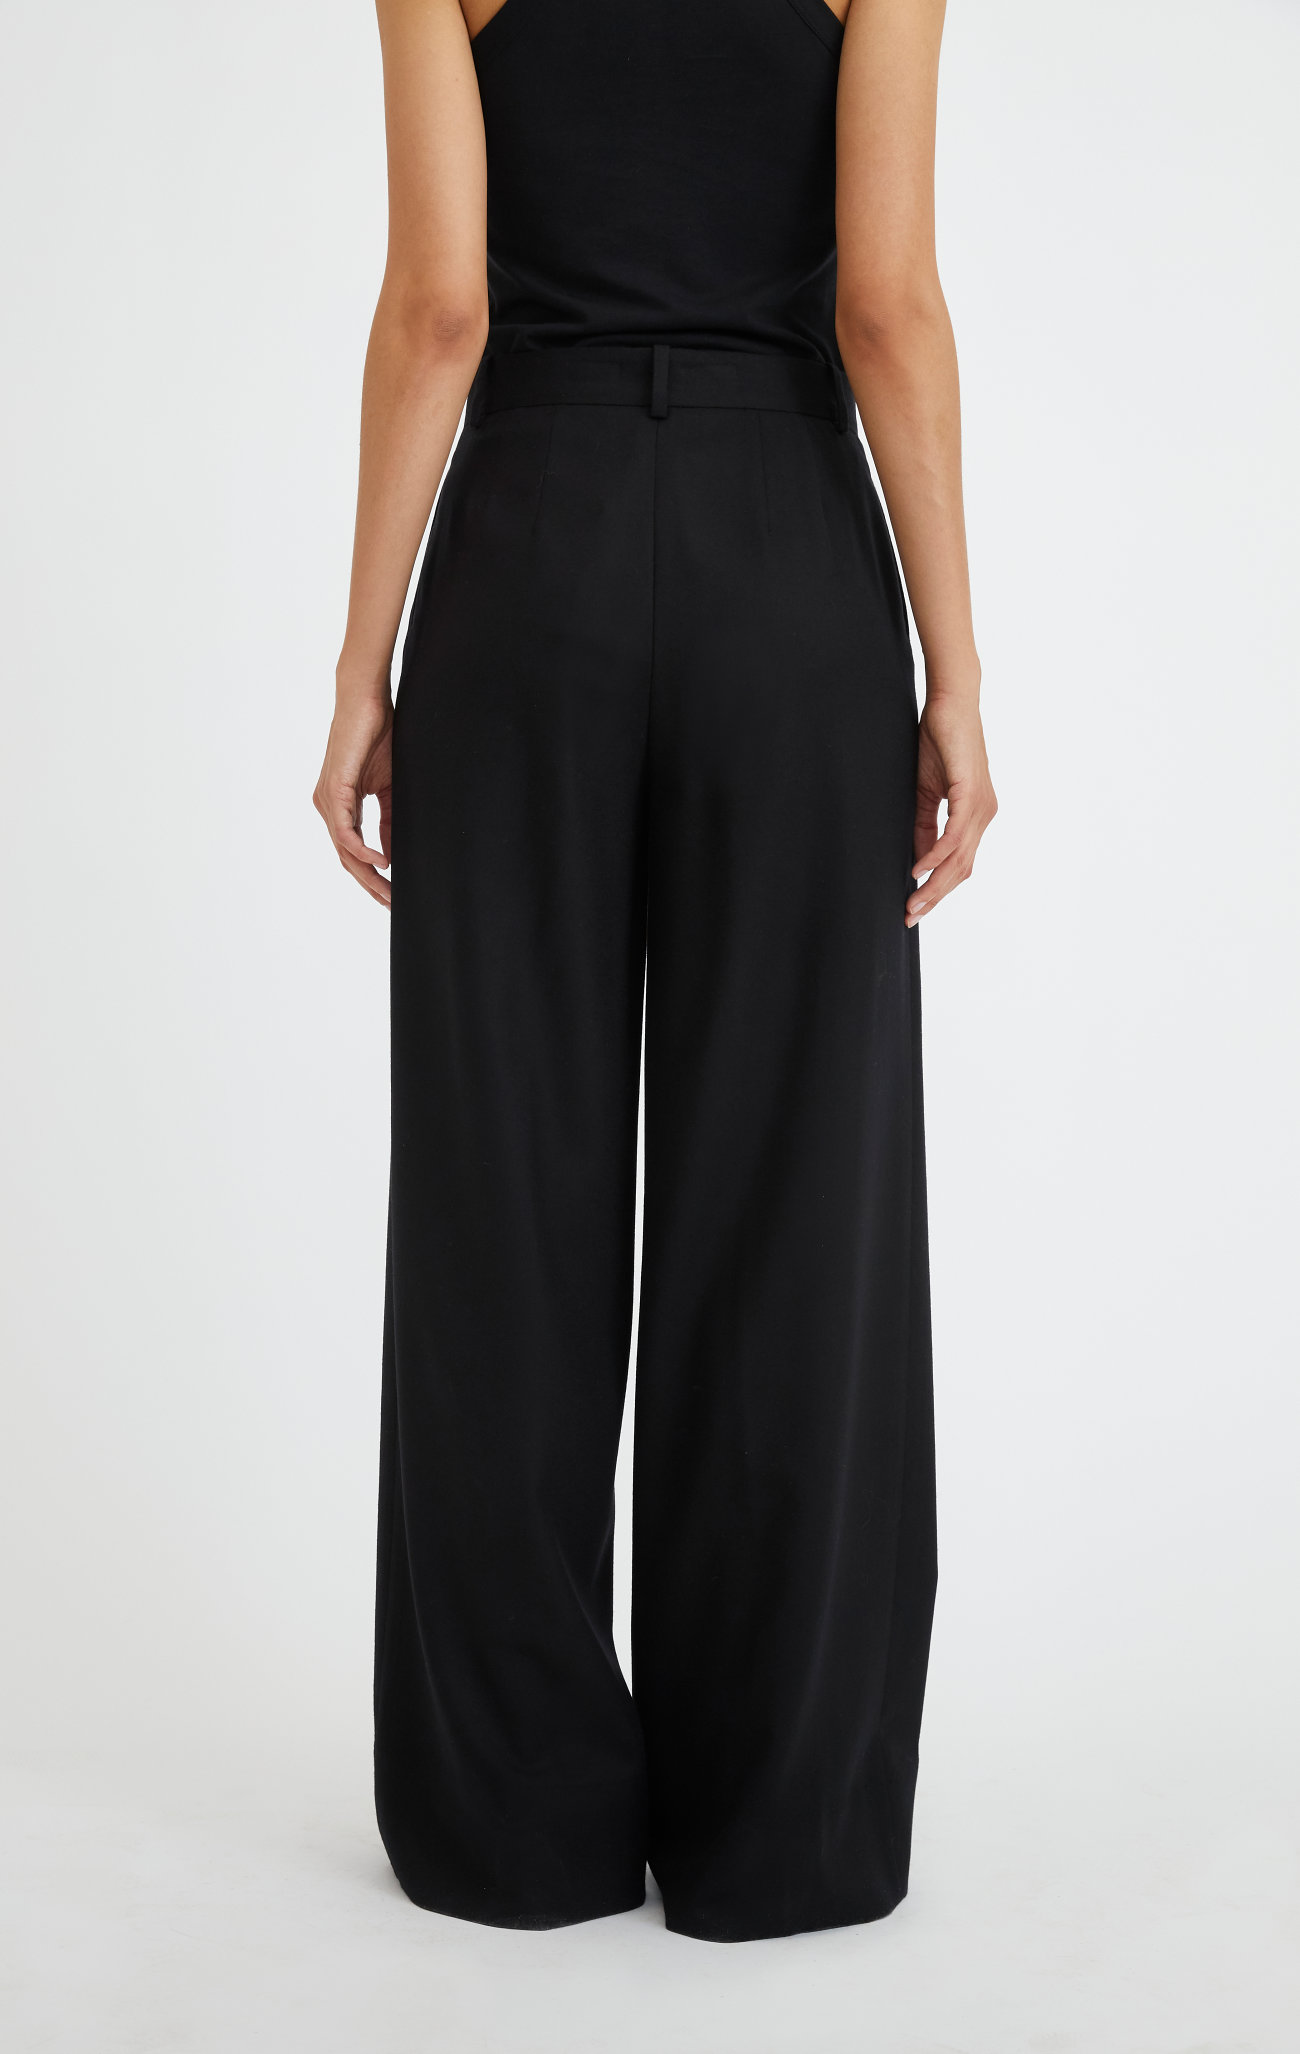 Rodebjer Pant Oona - Rodebjer